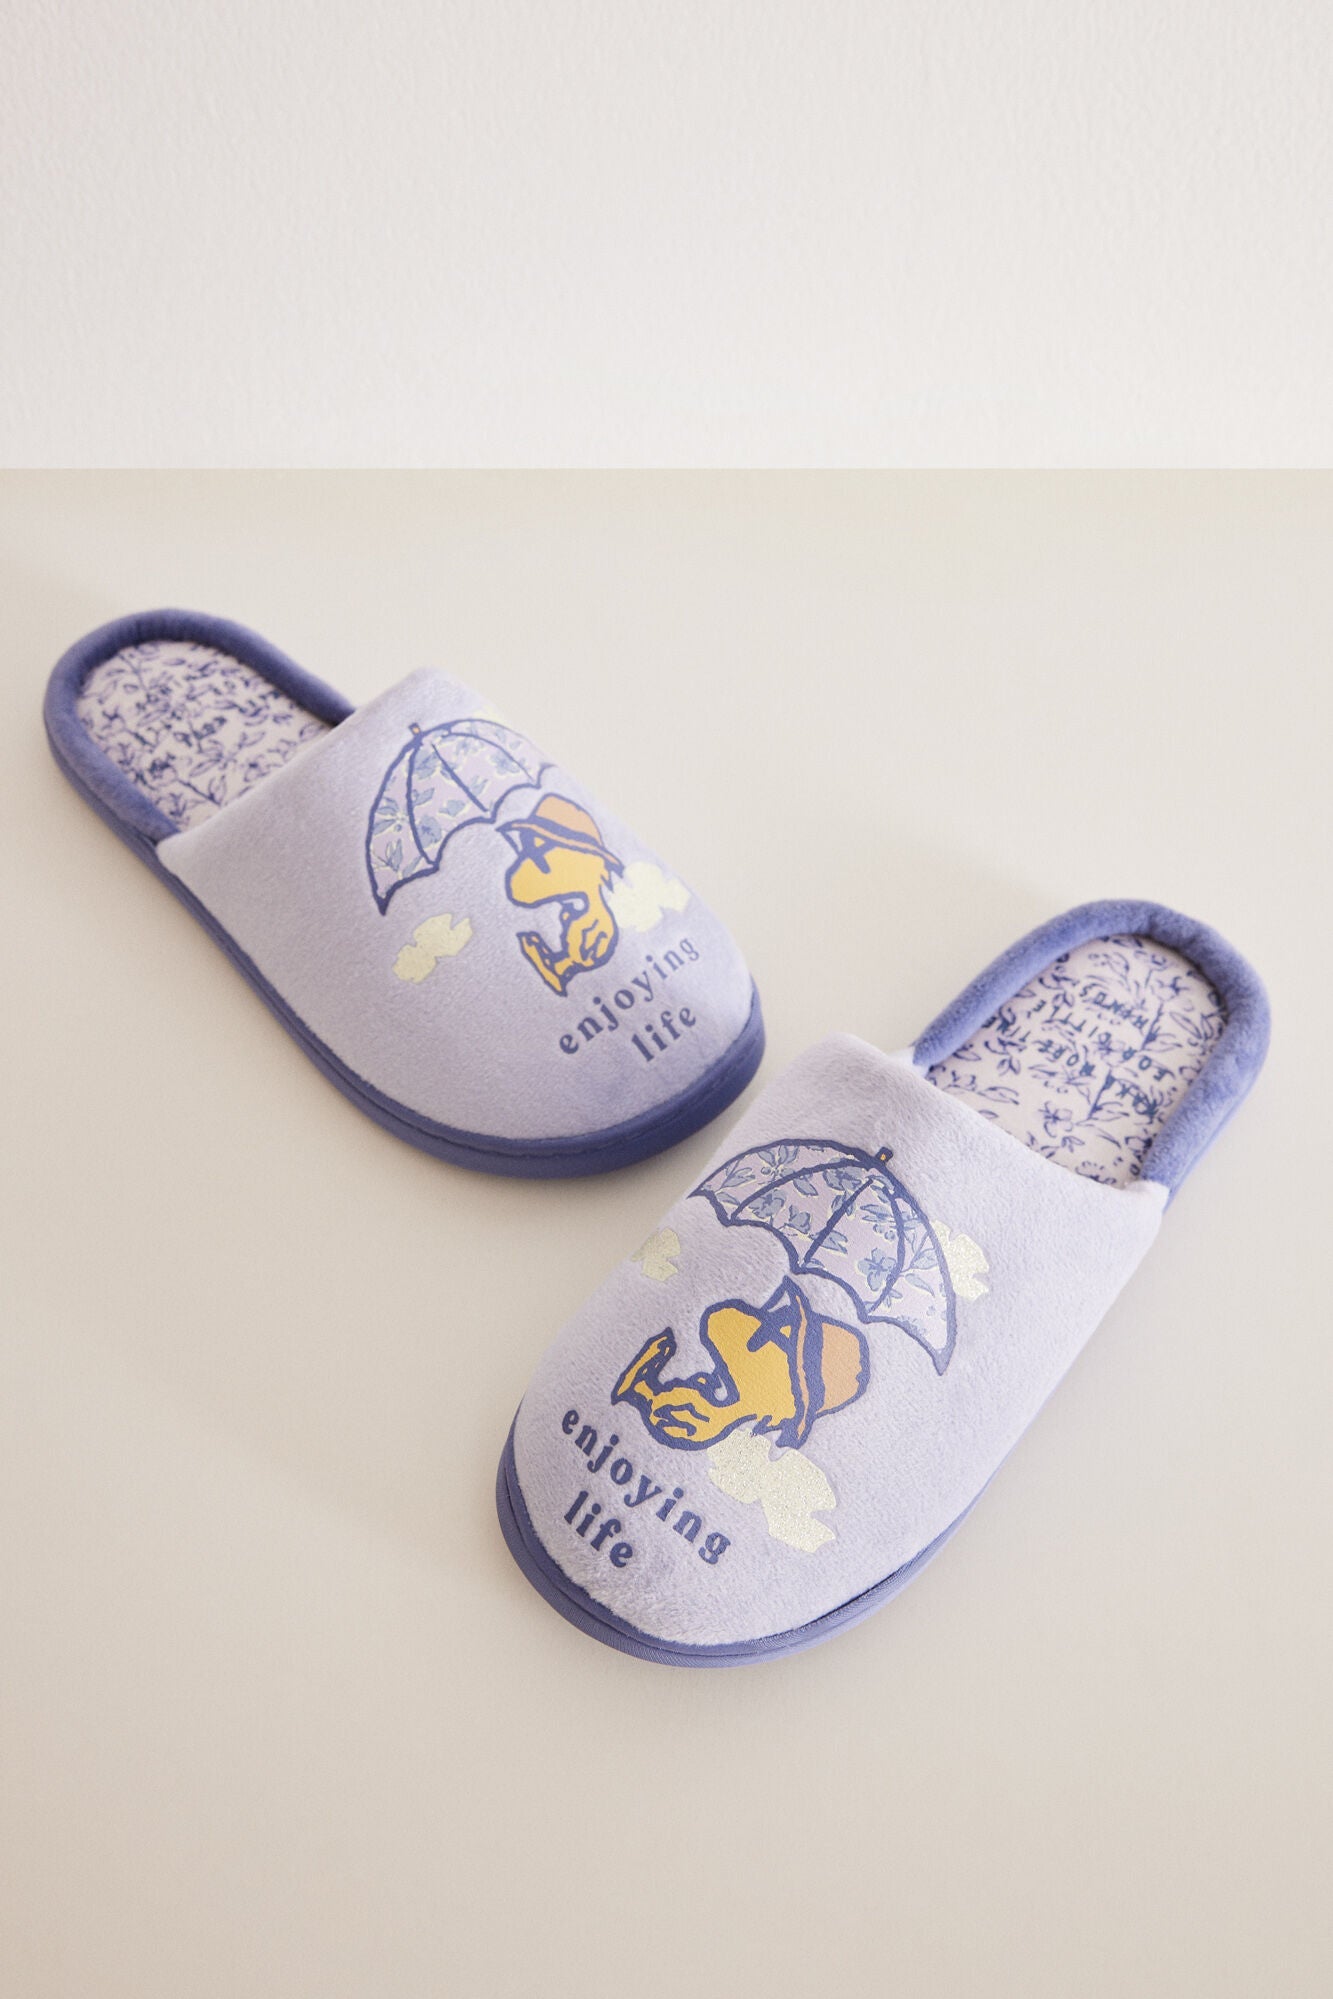 Snoopy lilac house slippers